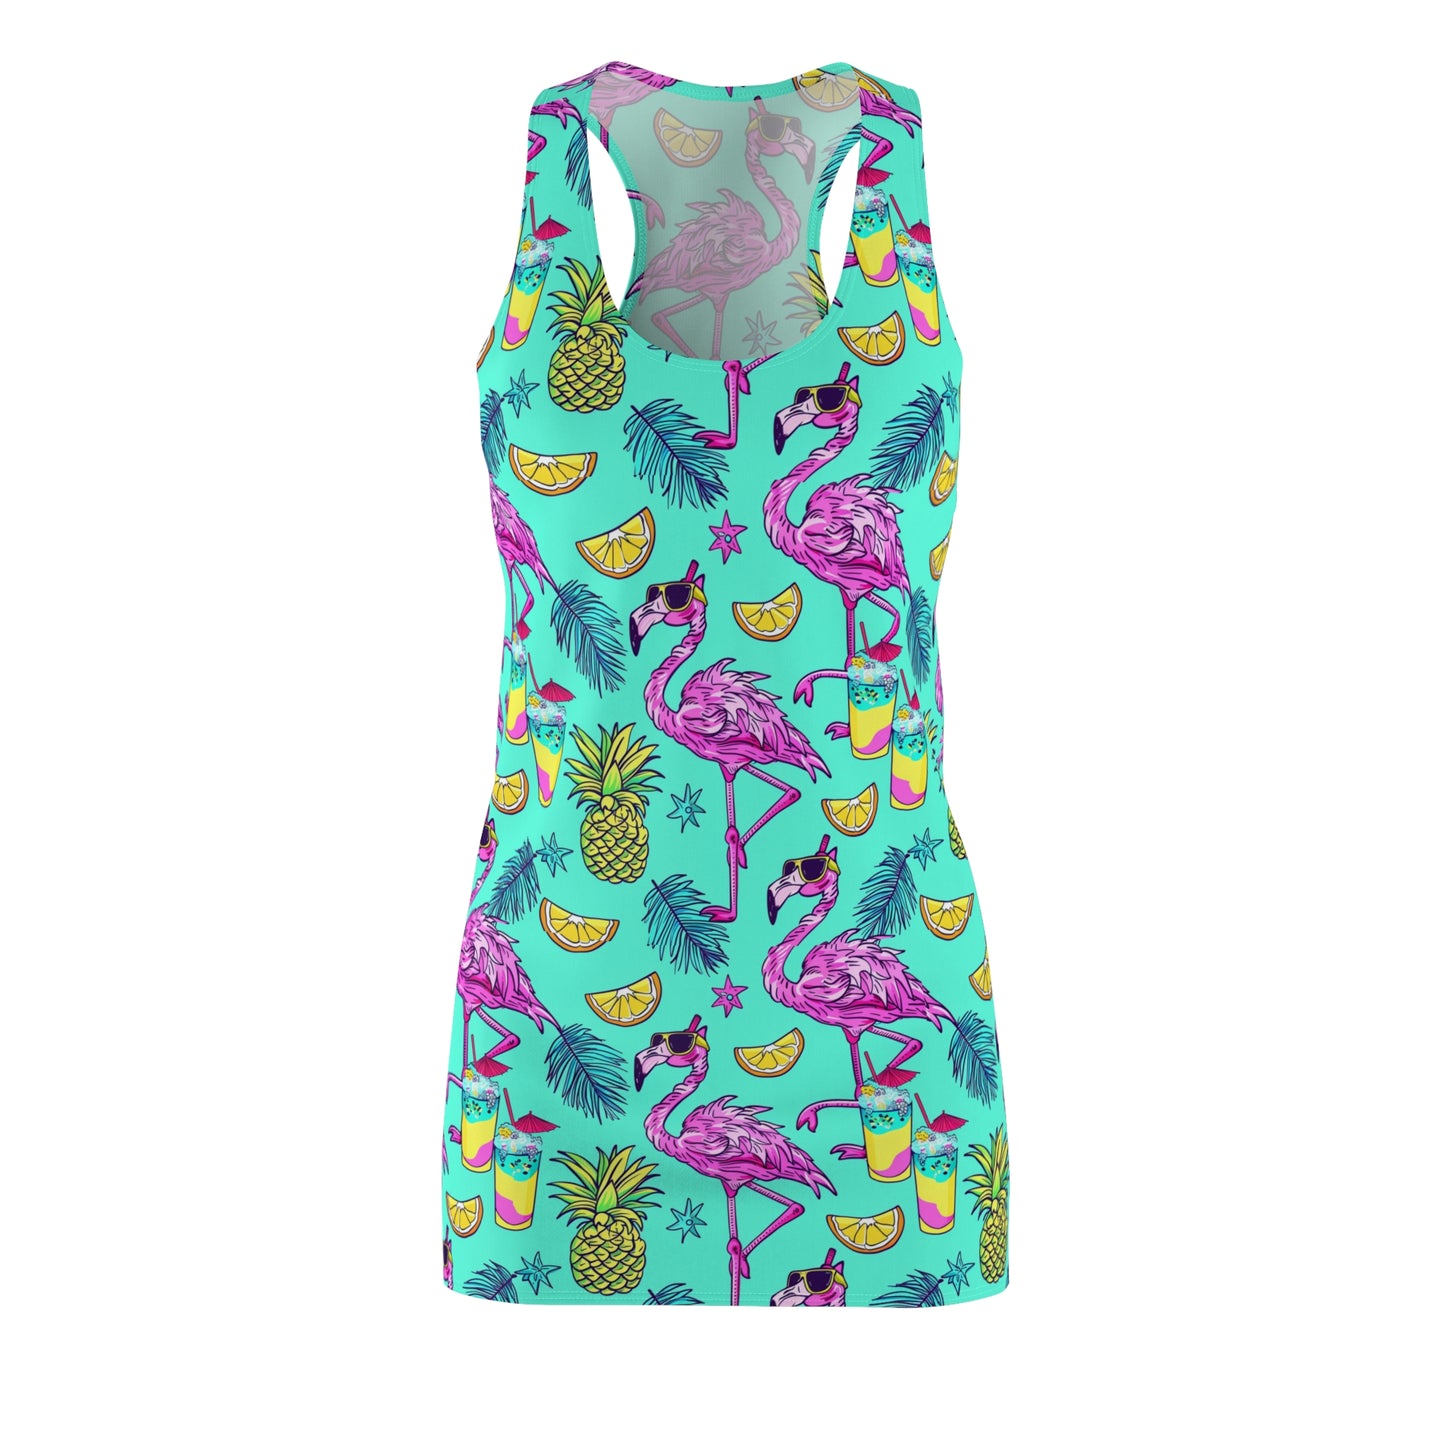 Flamingo Party Surface Beach Volleyball Club Cover Up Racerback Dress